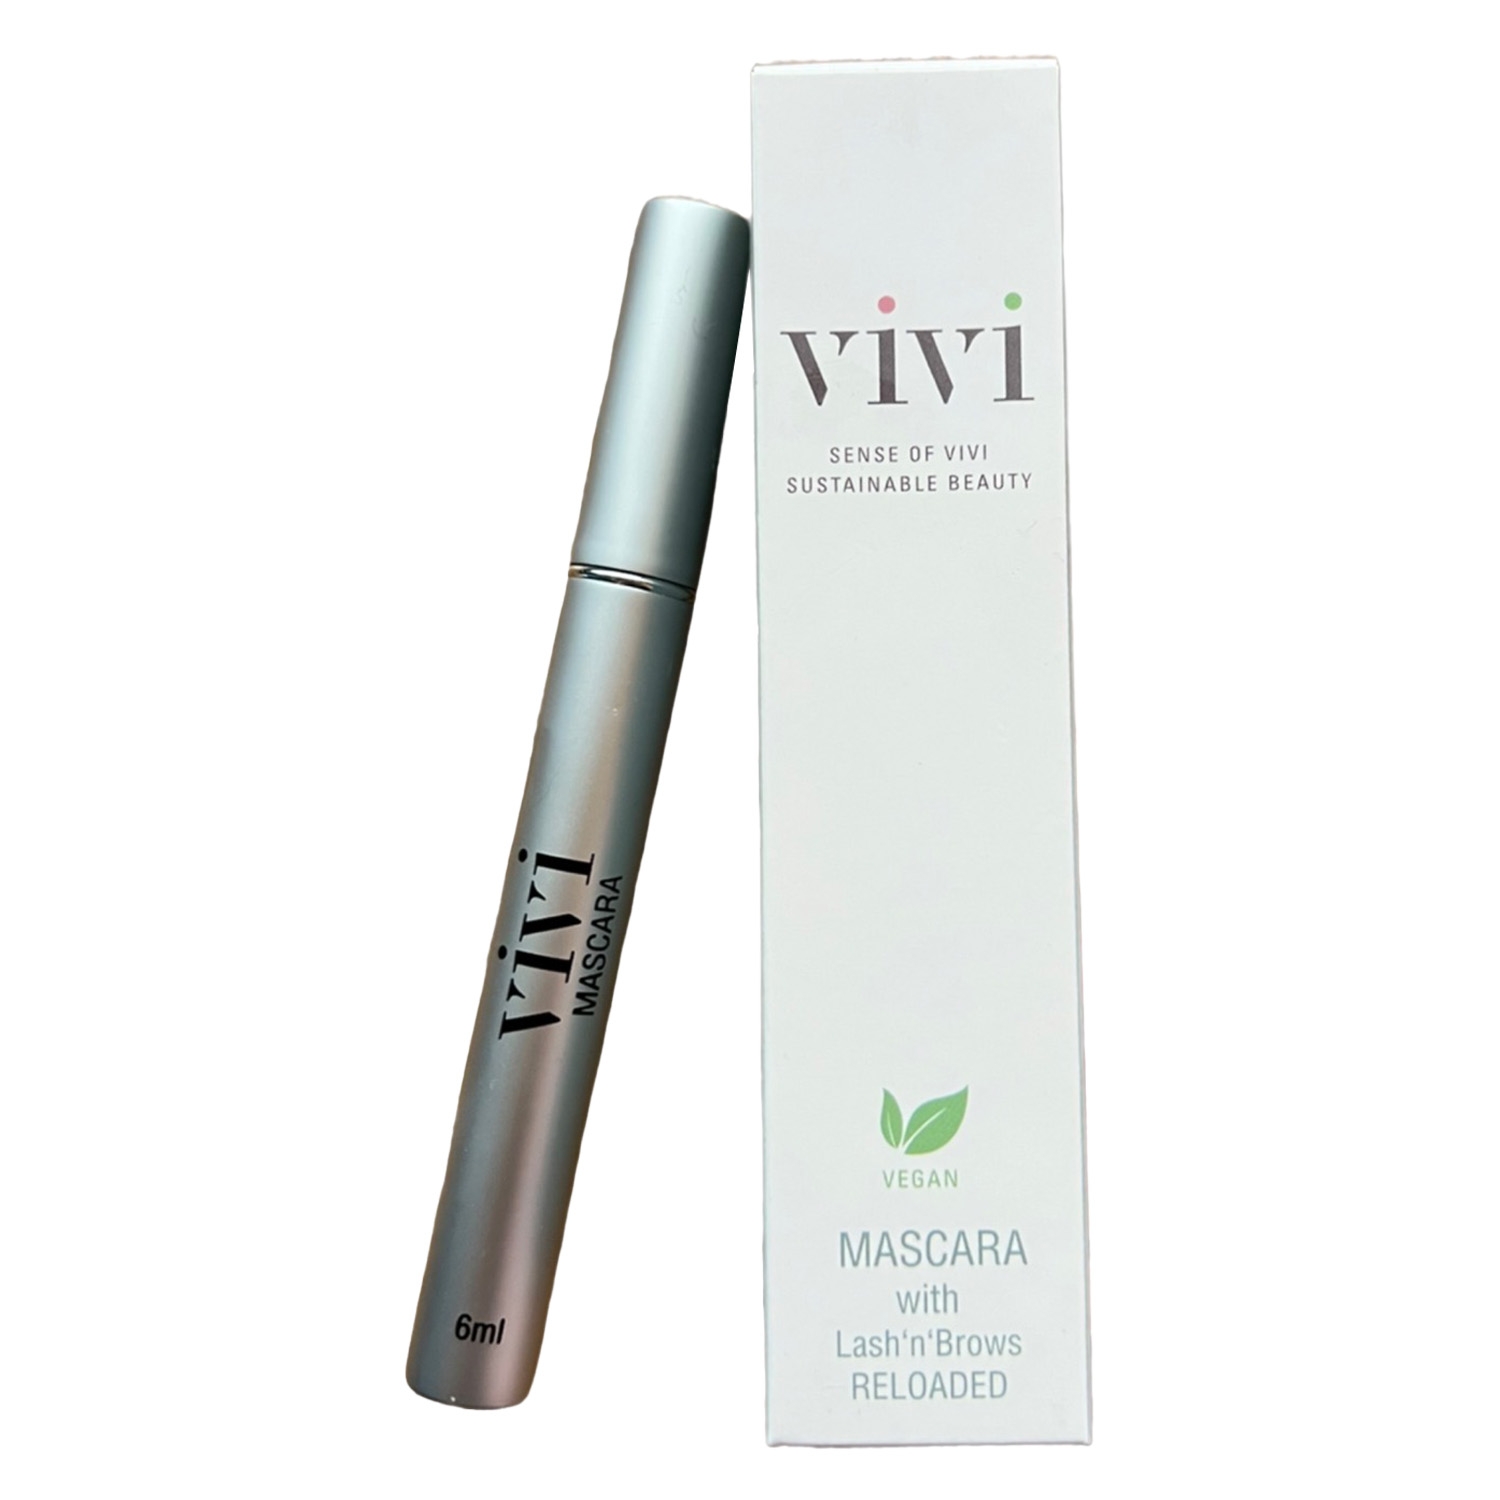 Product image from Vivi Beauty - Mascara with Lash’n’Brows Reloaded